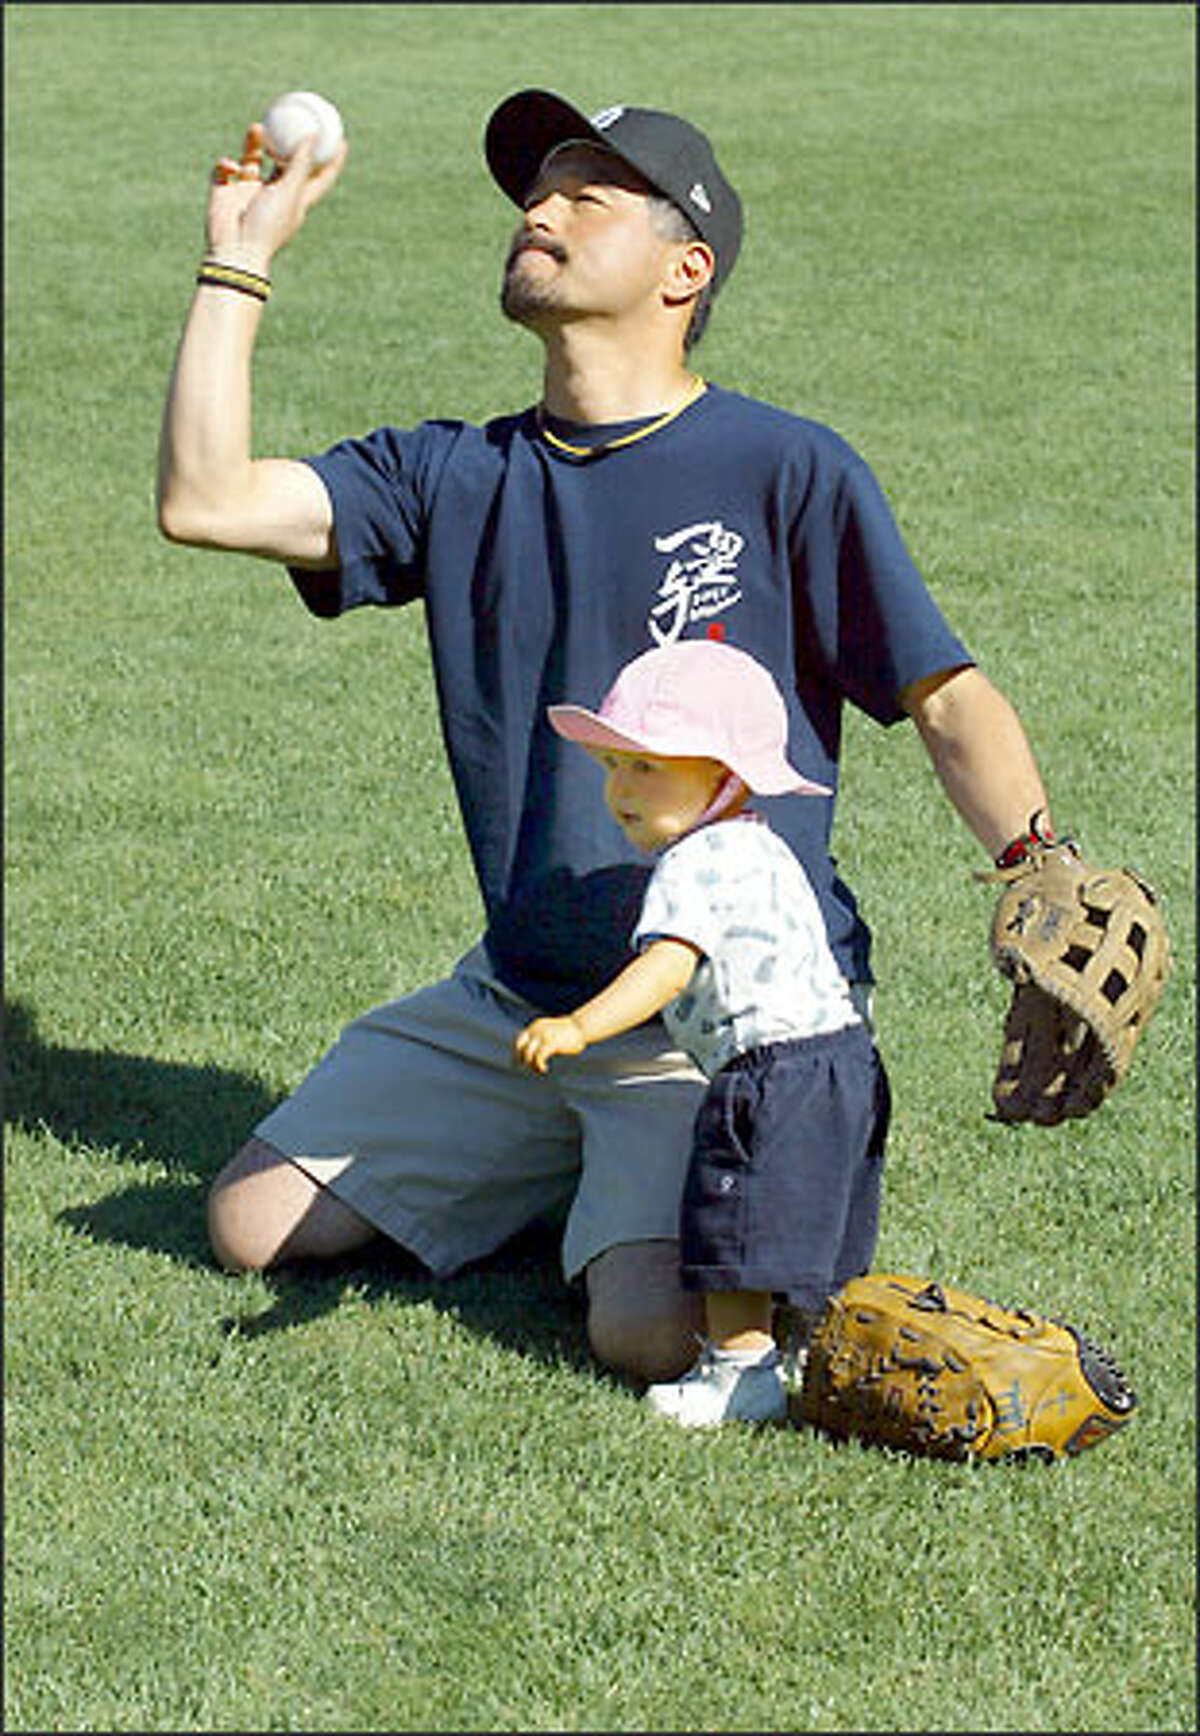 Yoshitaka Inoue tosses a ball to his son yesterday at Safeco Field, while daughter Erina prefers to stay close.